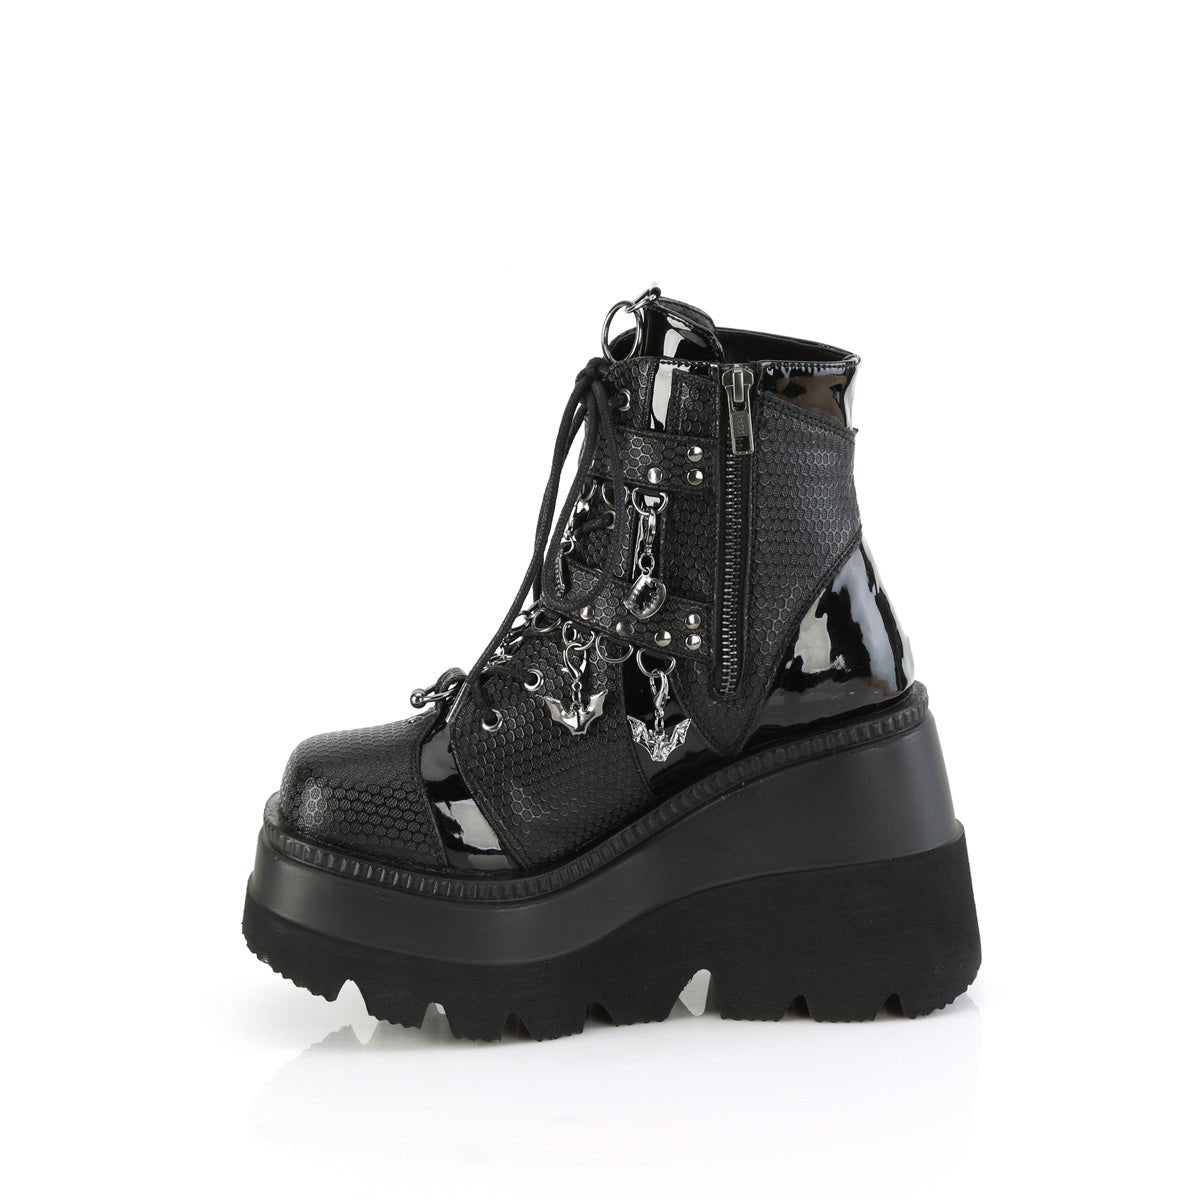 Too Fast | Demonia Shaker 66 | Black Vegan Leather Women's Ankle Boots